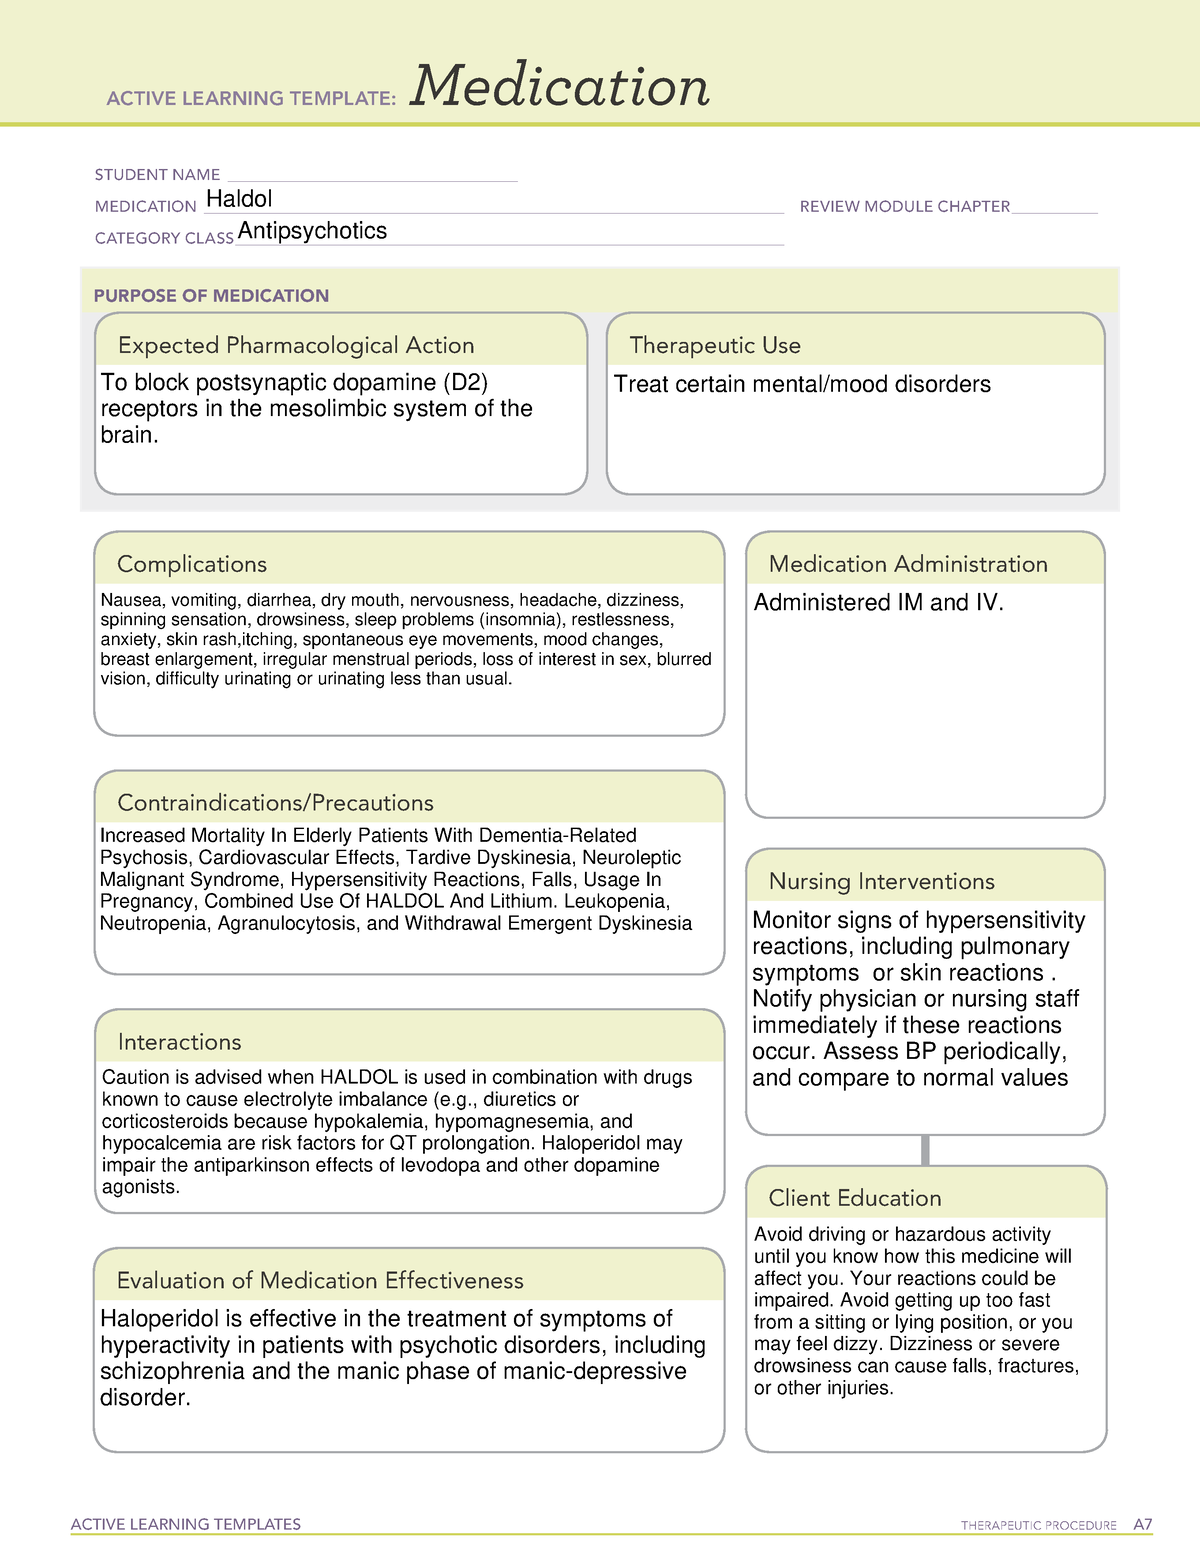 Haldol Medication ACTIVE LEARNING TEMPLATES THERAPEUTIC PROCEDURE A